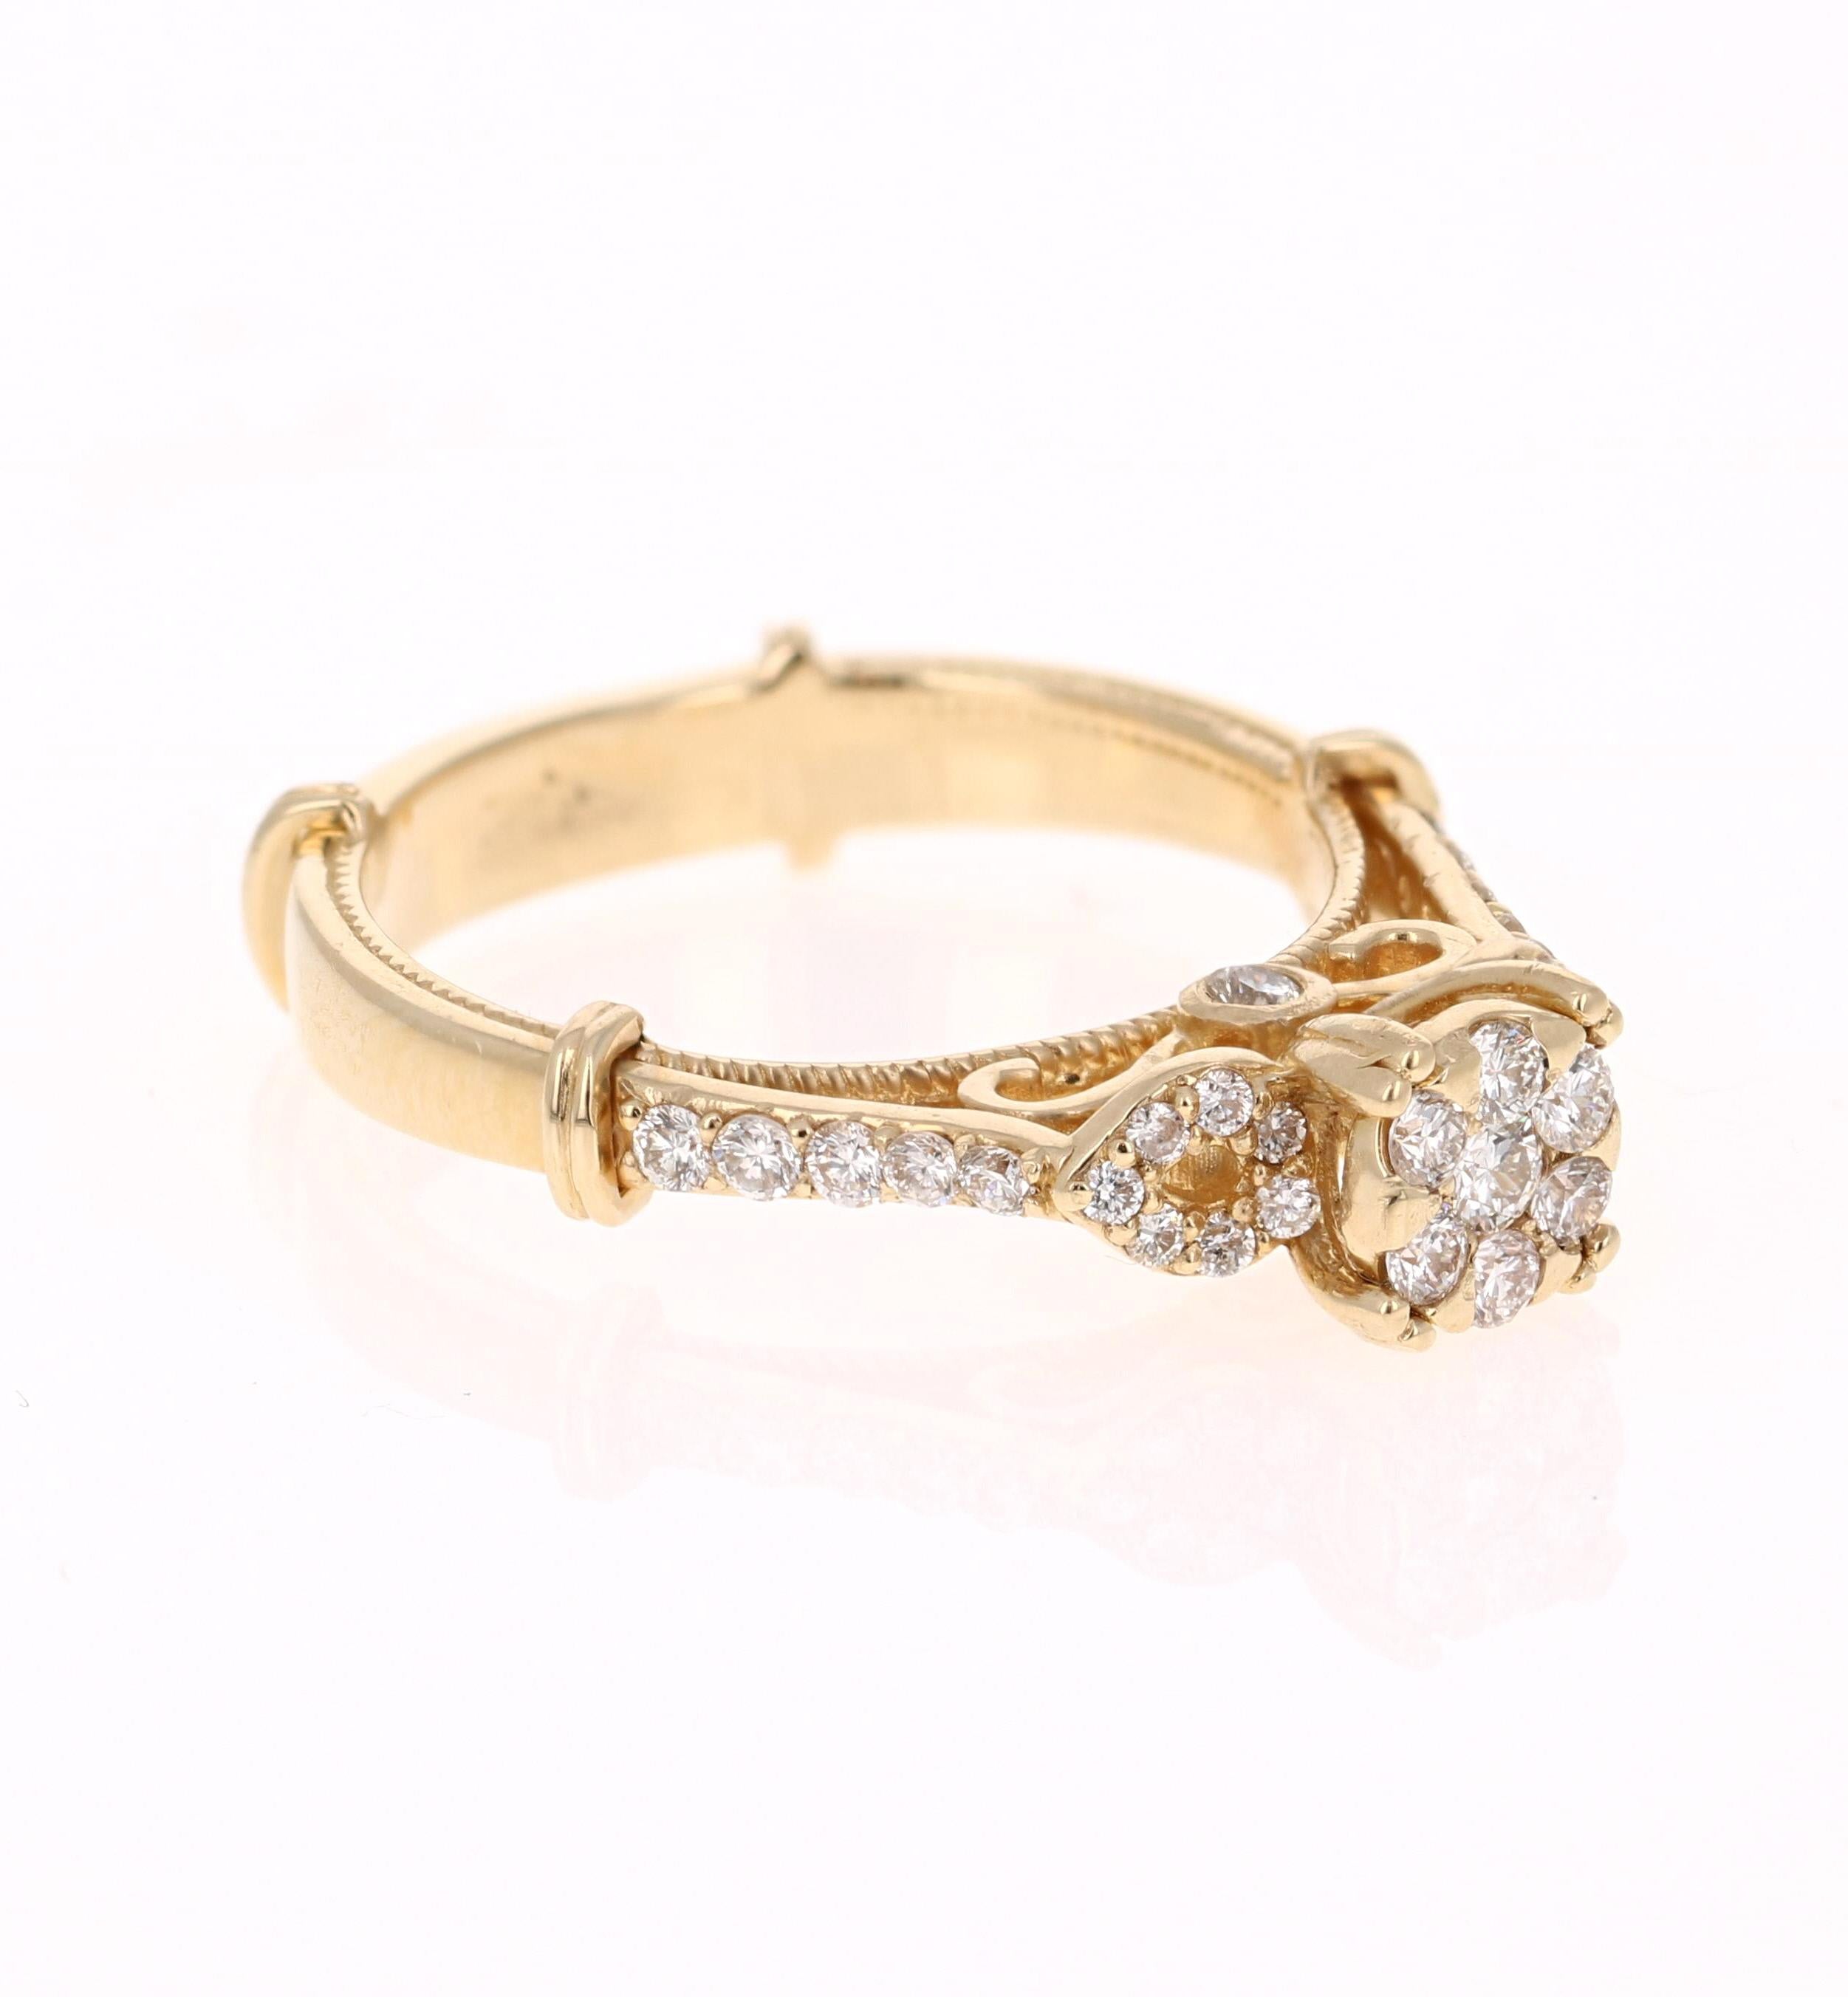 This unique ring has 66 Round Cut Diamonds that weigh 0.50 Carats. The Clarity and Color of the Diamonds are SI1-F.

It is beautifully set in 14 Karat Yellow Gold and weighs approximately 4.3 grams. The center cluster is approximately 5.5 mm. 

The